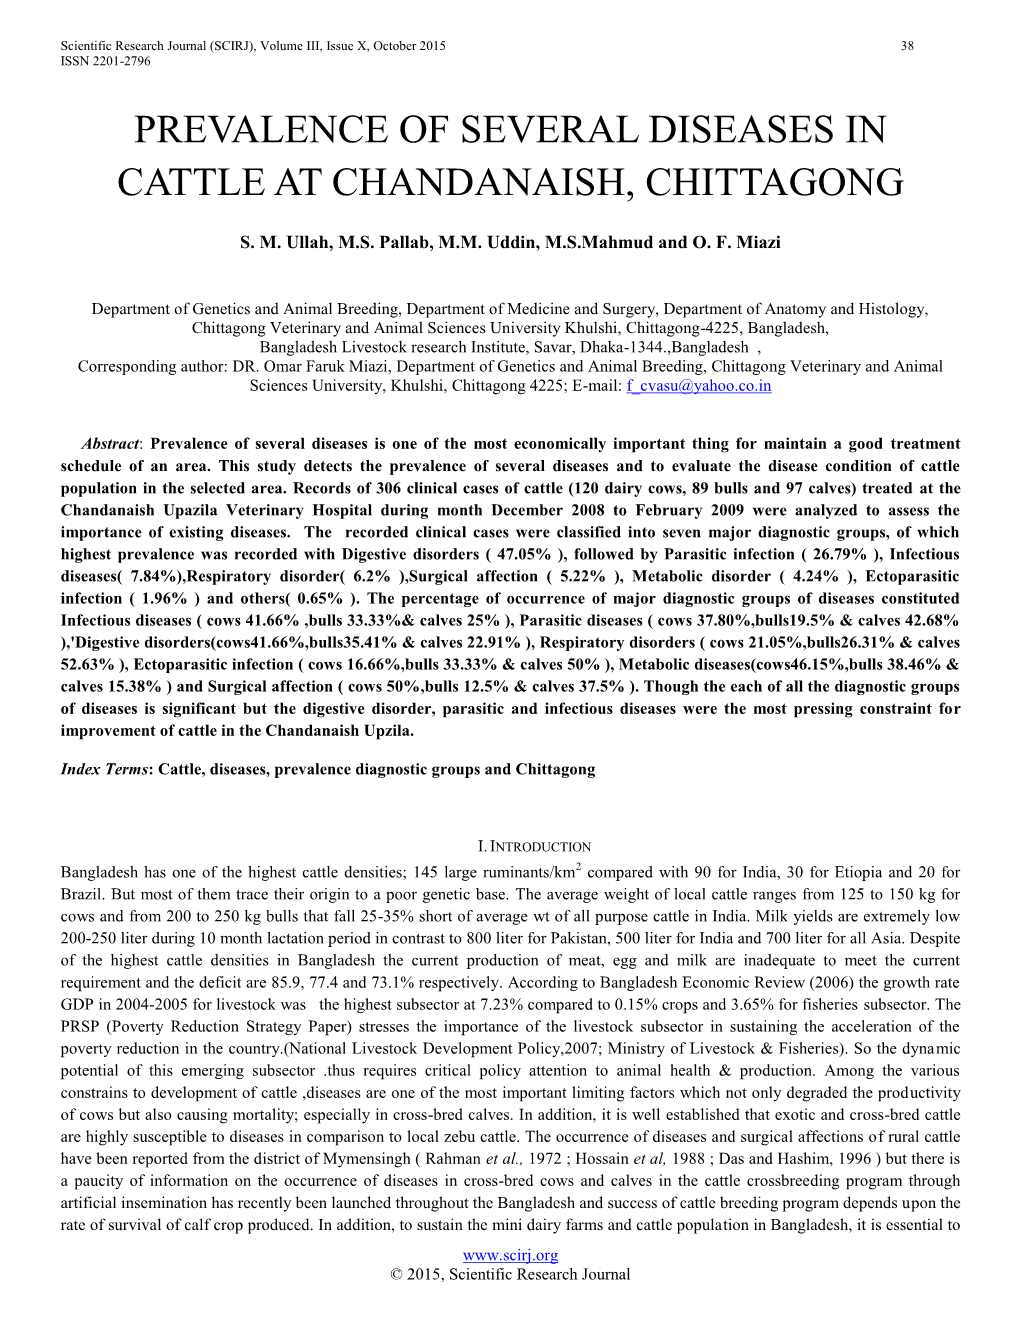 Prevalence of Several Diseases in Cattle at Chandanaish, Chittagong